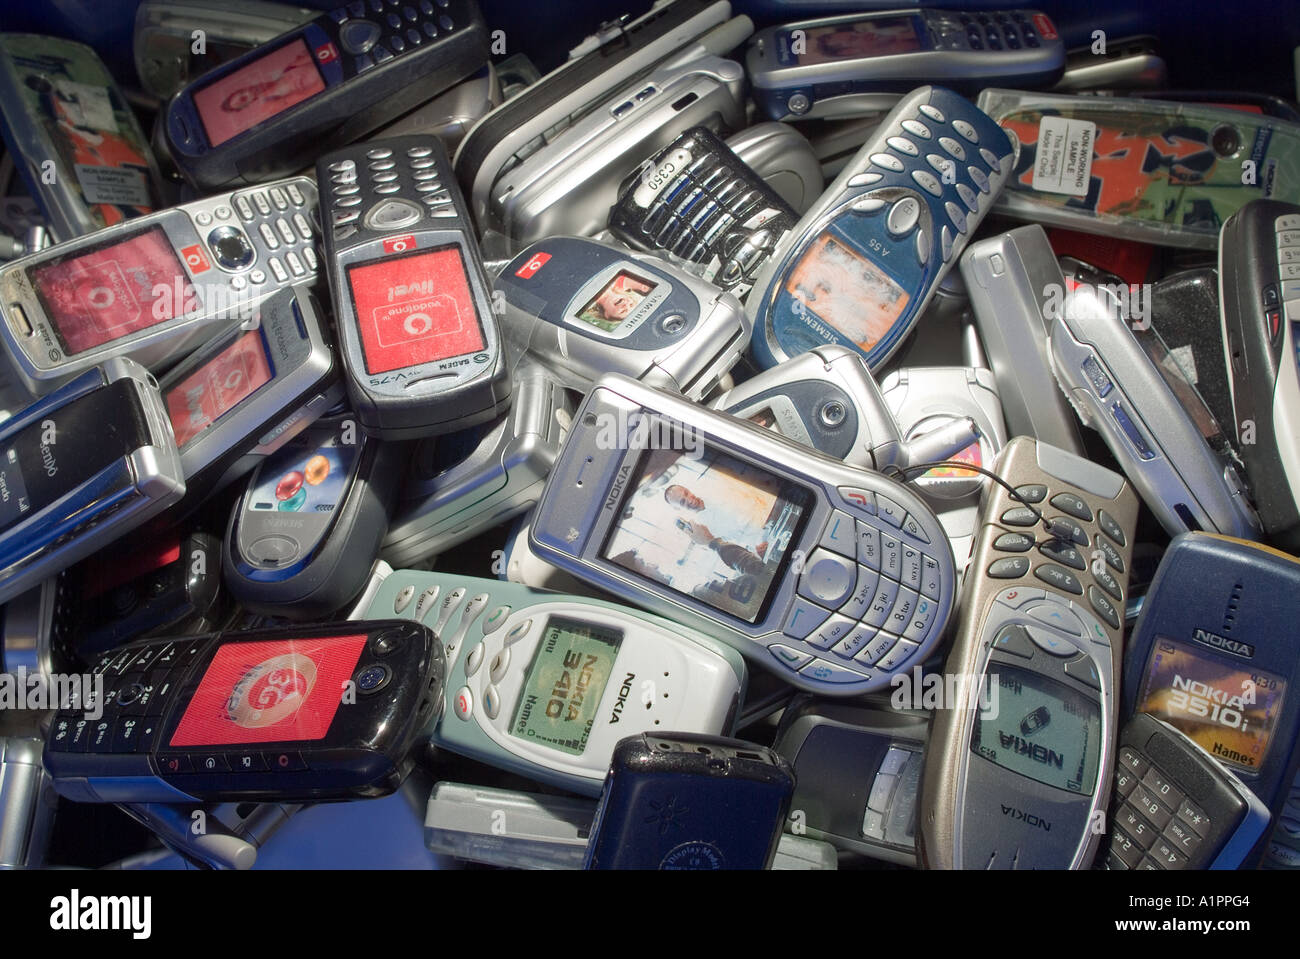 pile of used mobile telephones Stock Photo